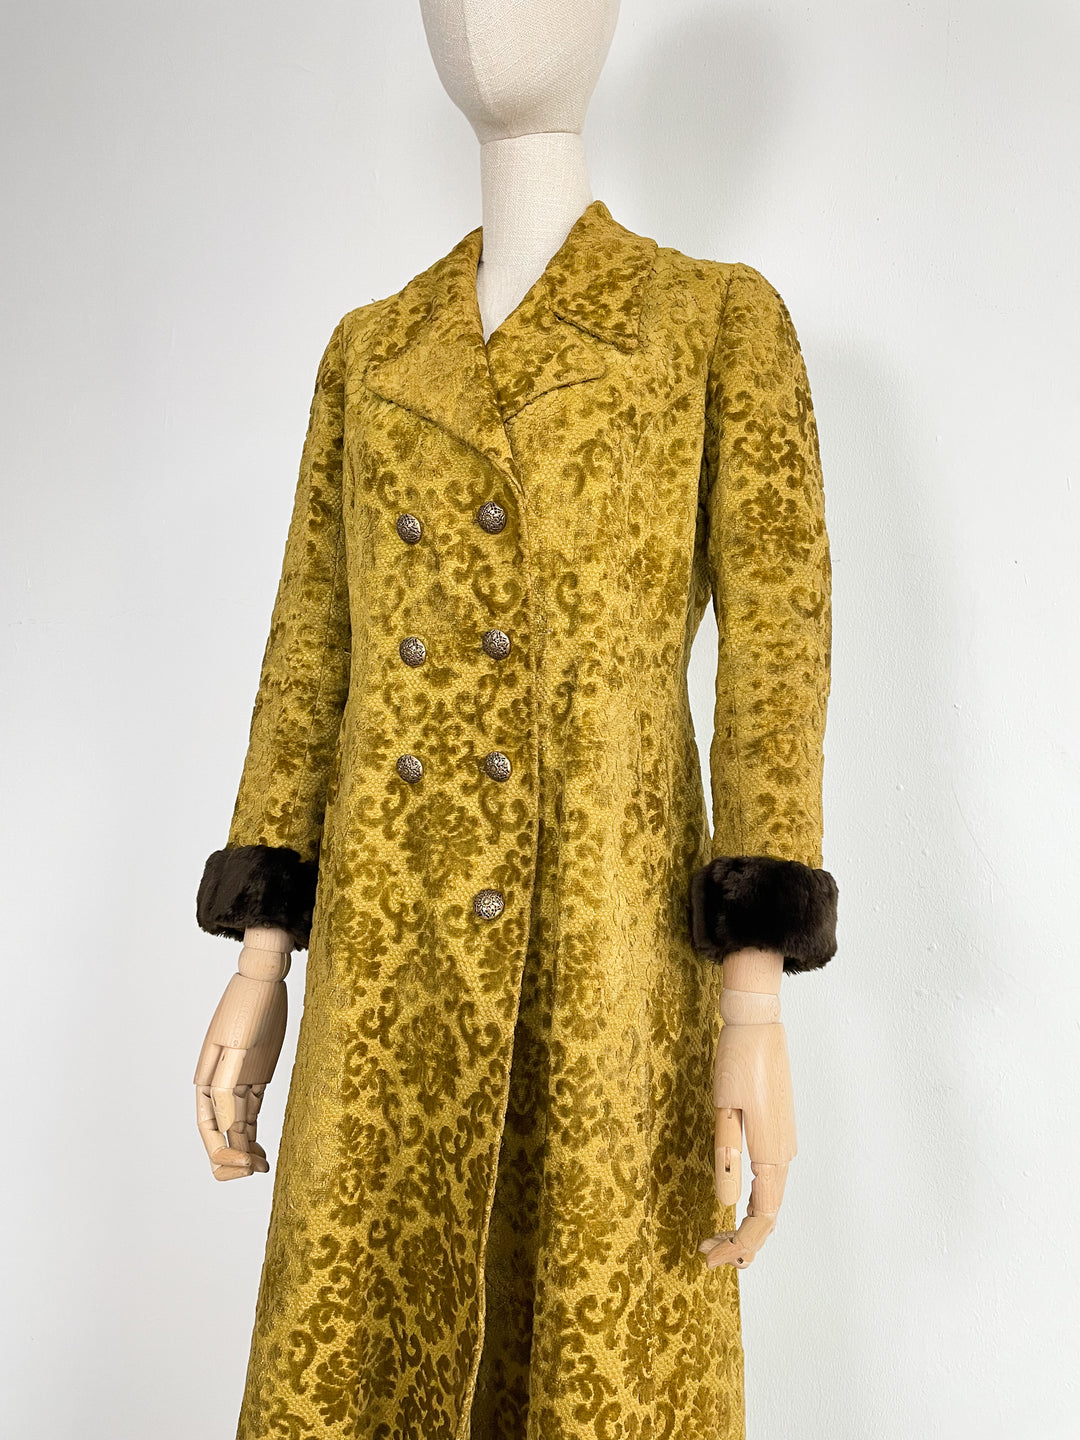 The Gilded Gold 1970s Maxi Coat